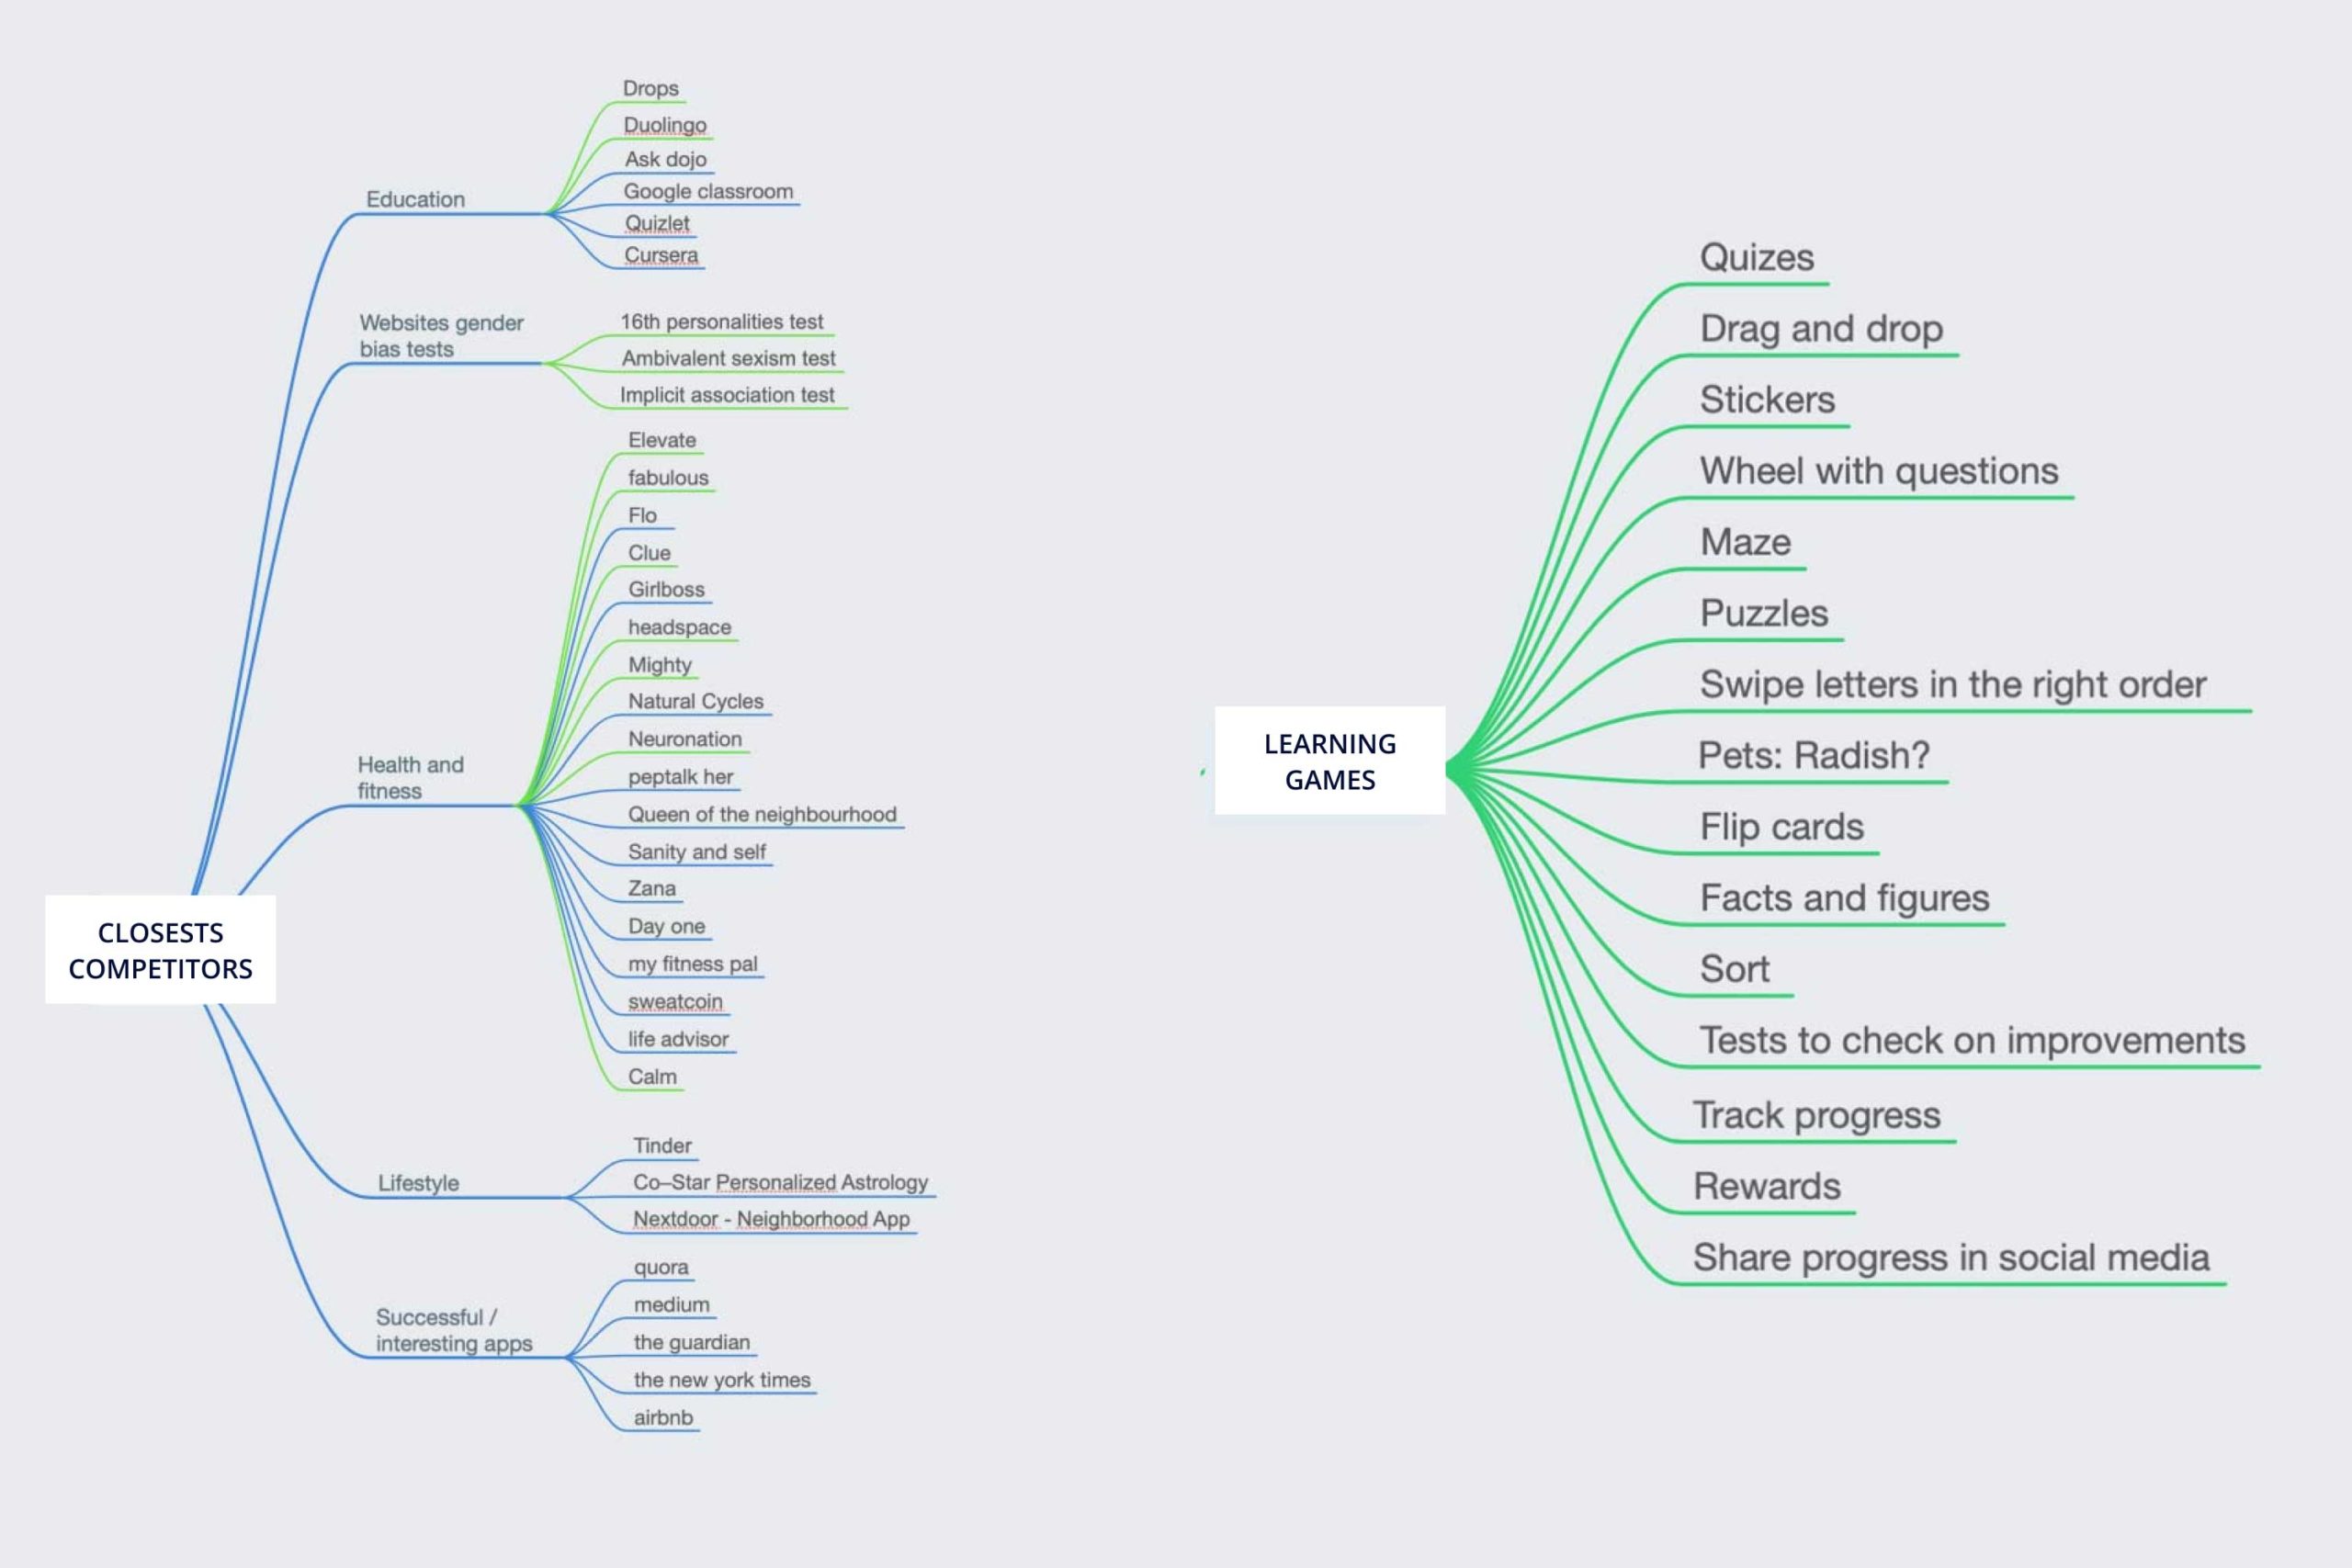 Mind-map competitor apps